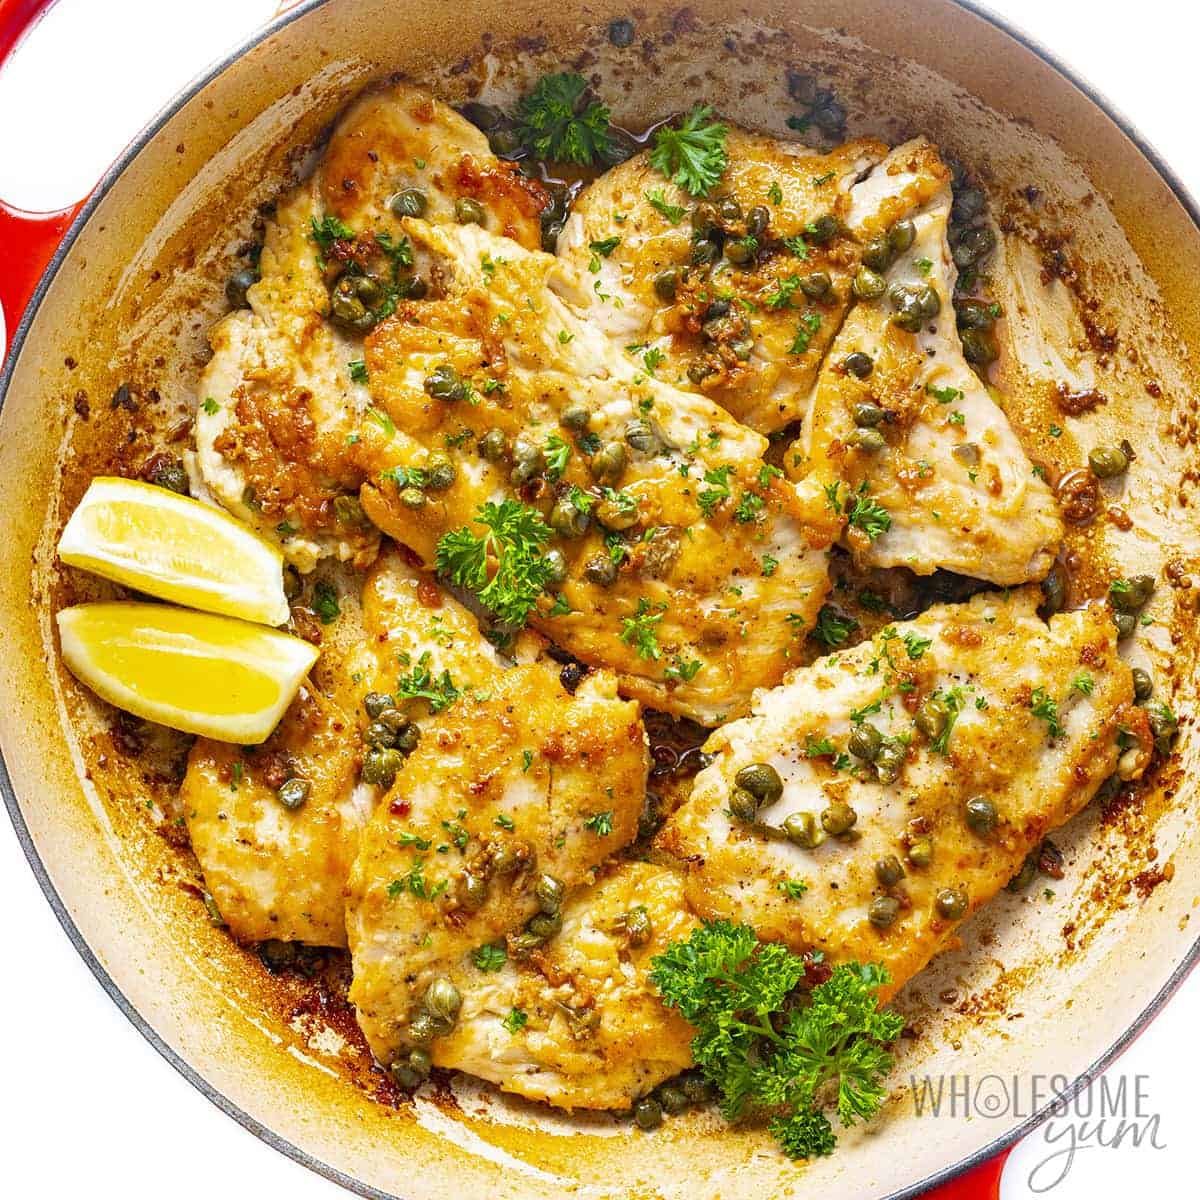 Complete the chicken piccata recipe in a pan with lemon.